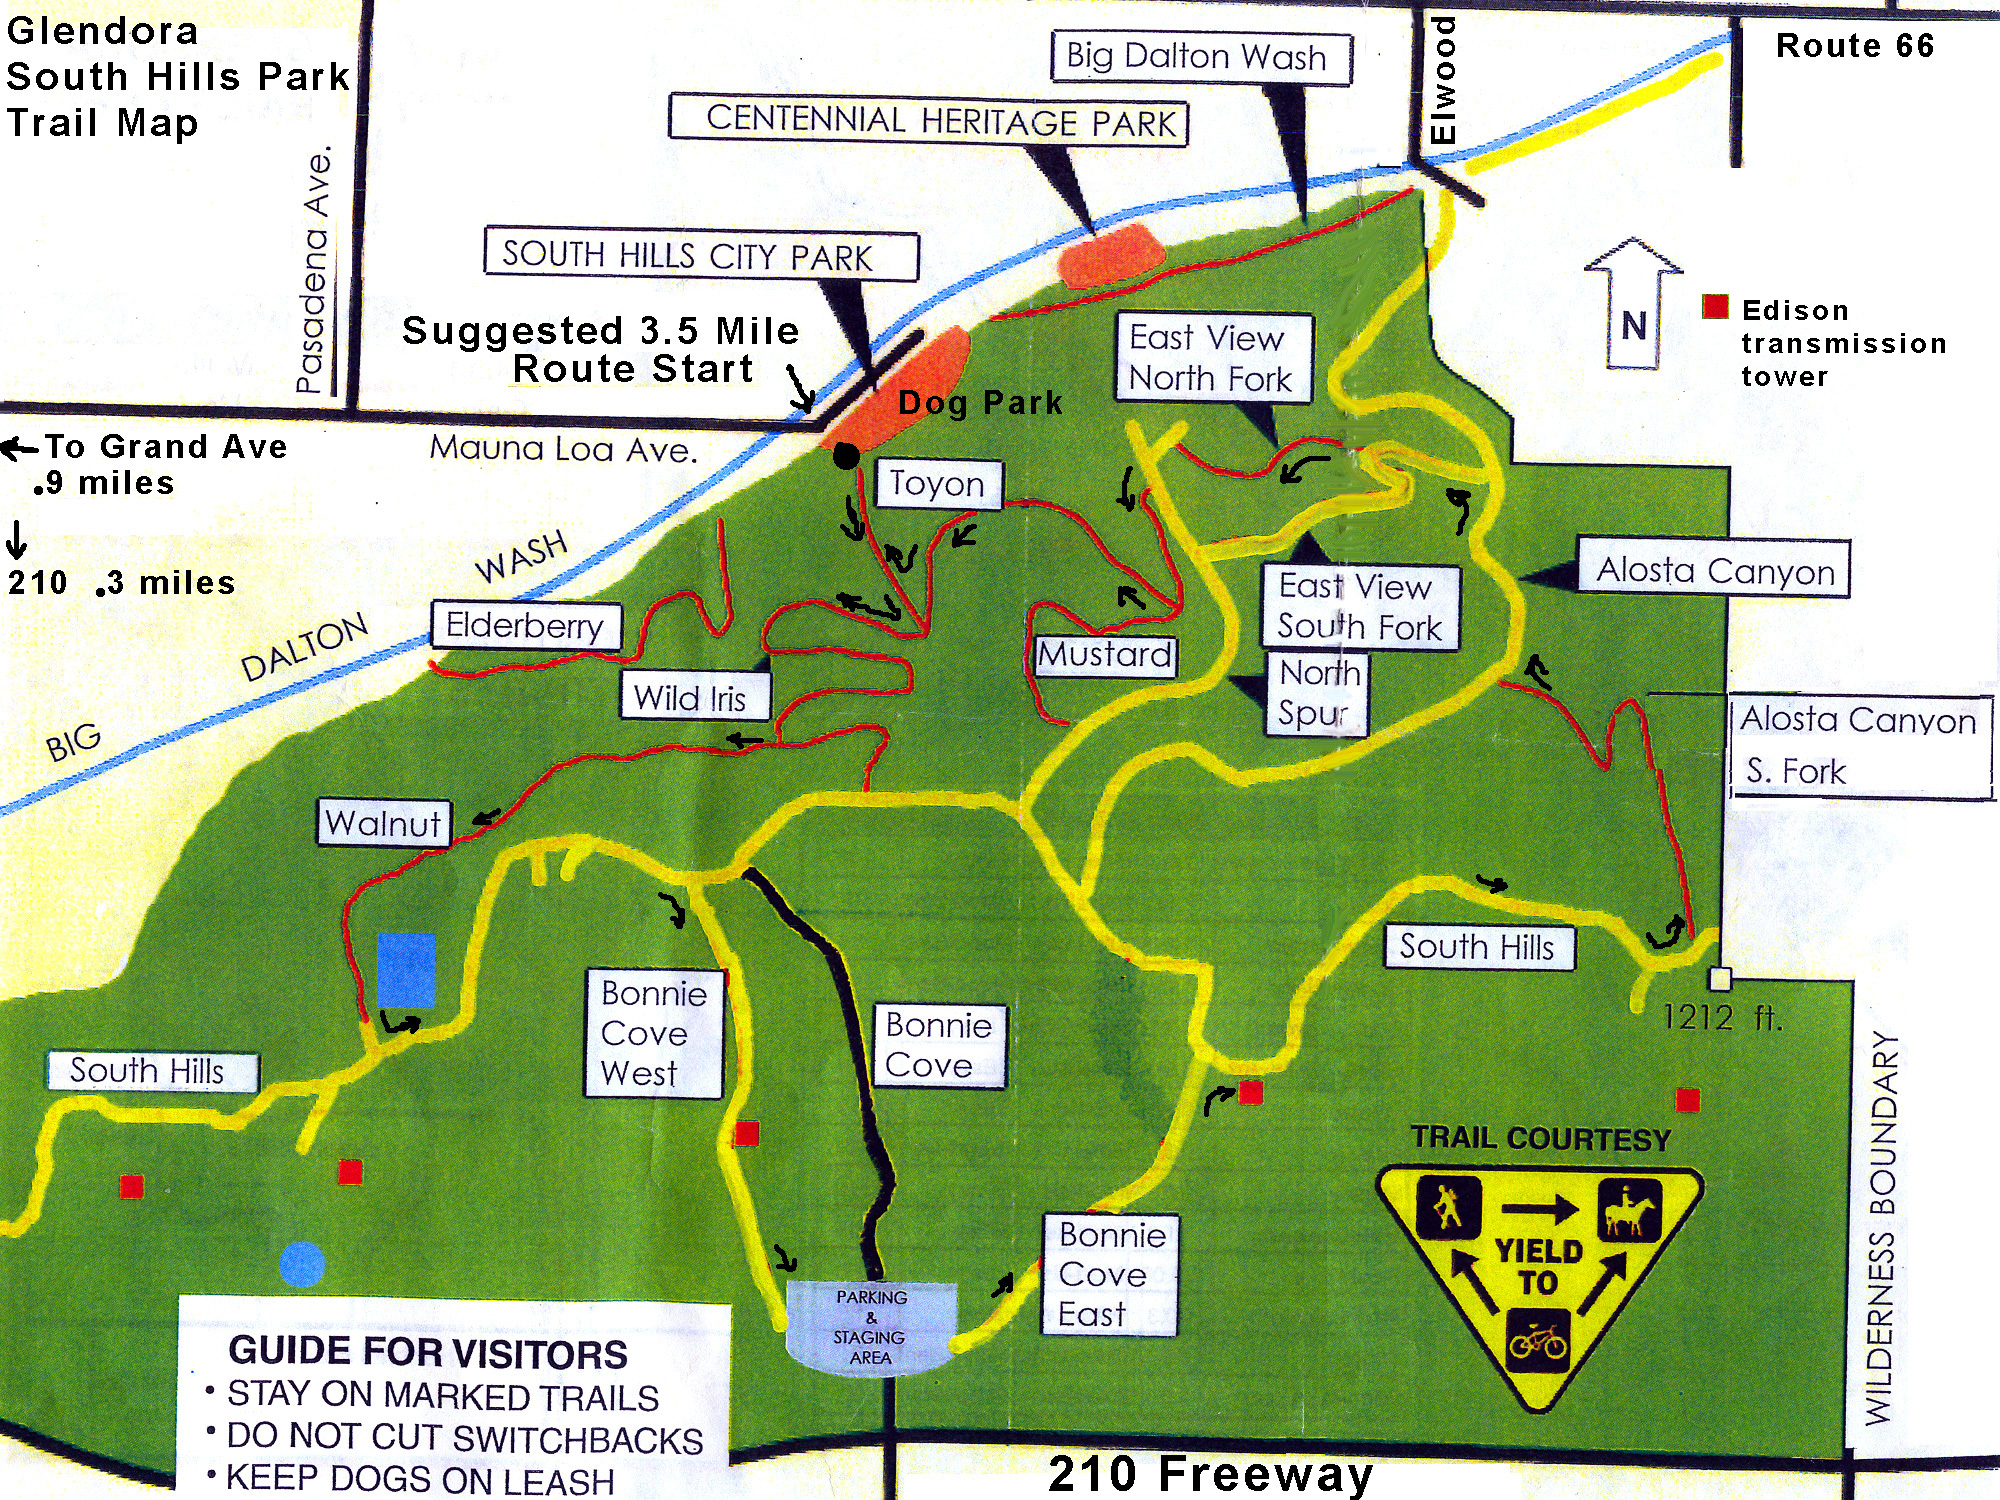 South Hills Trail Map.